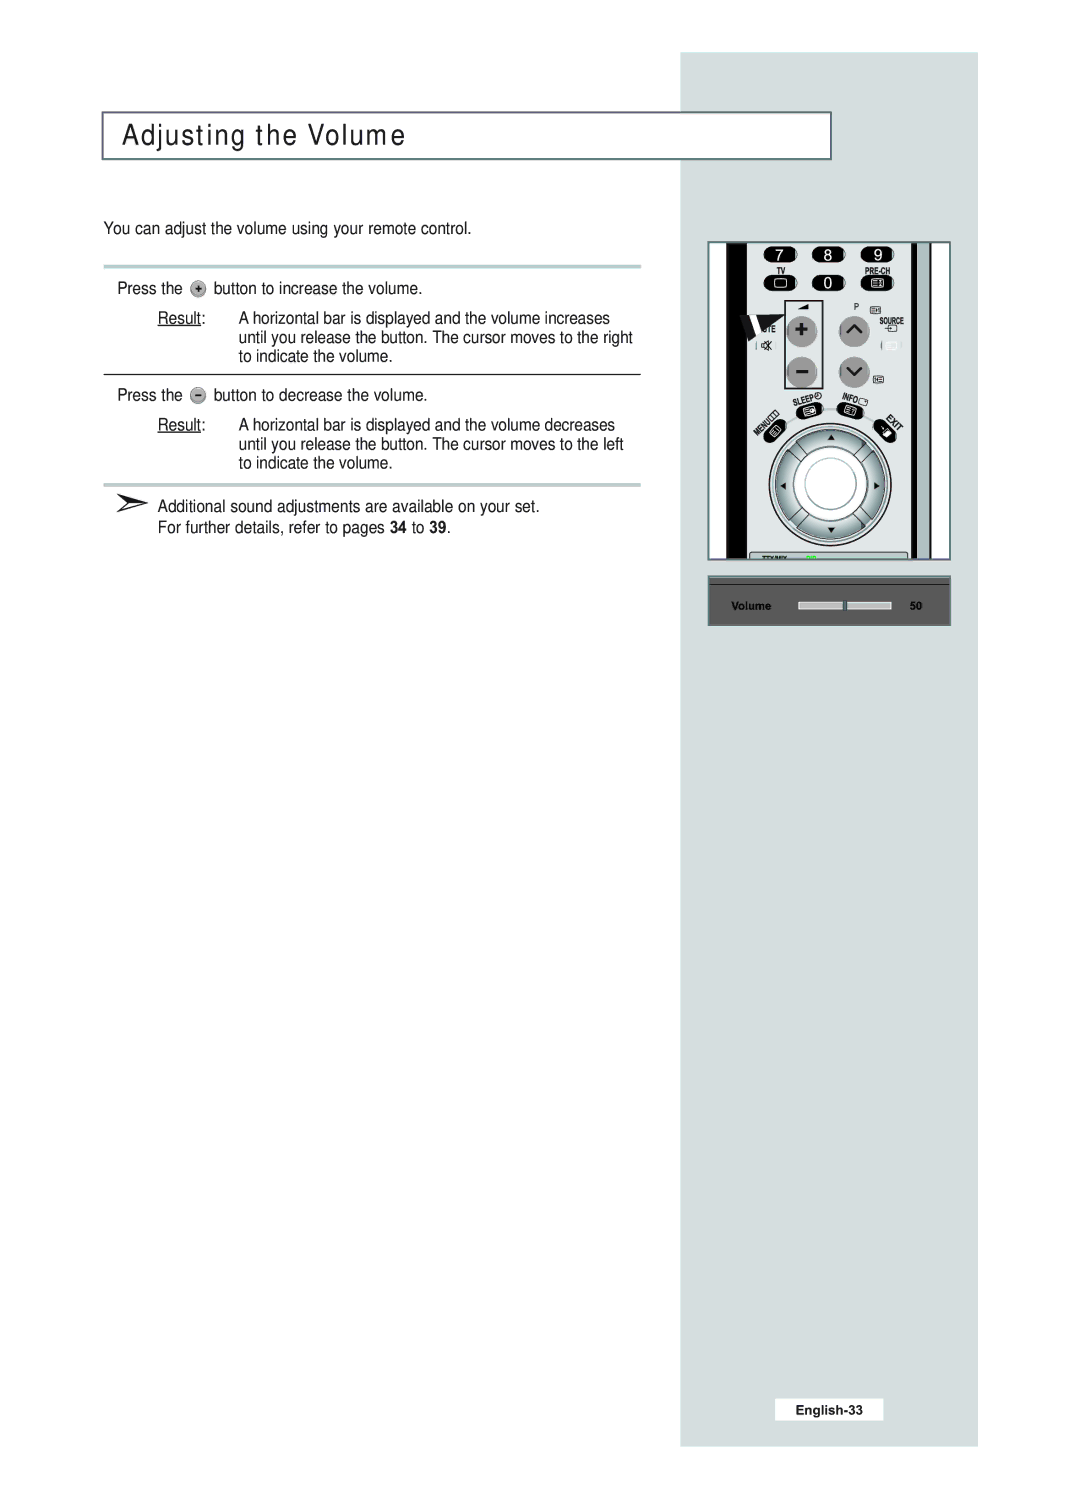 Samsung LE23R51B manual Adjusting the Volume, You can adjust the volume using your remote control 